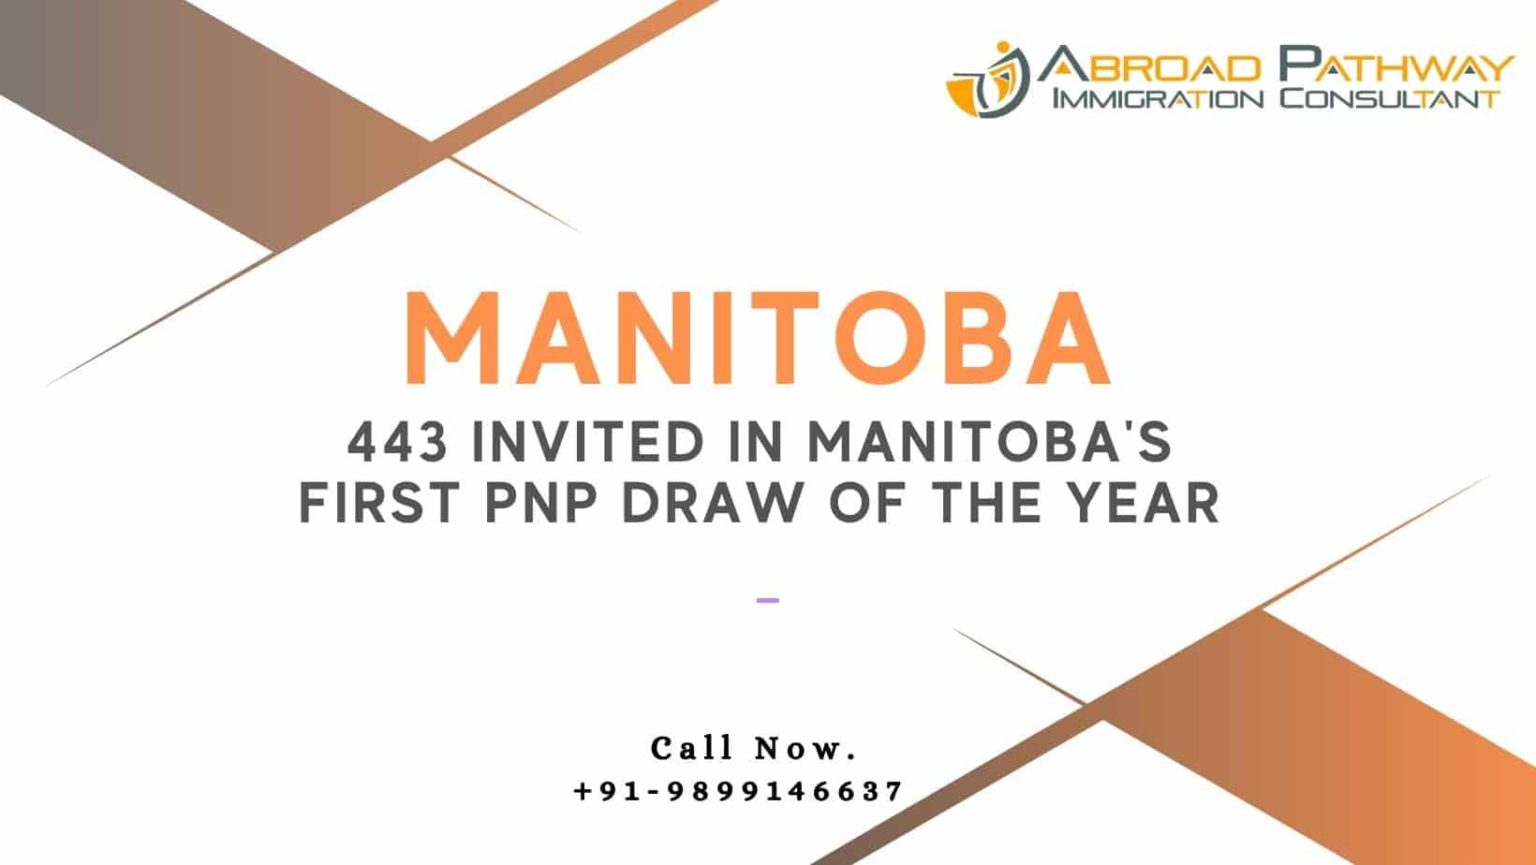 Manitoba Invites 443 Candidates in first PNP draw